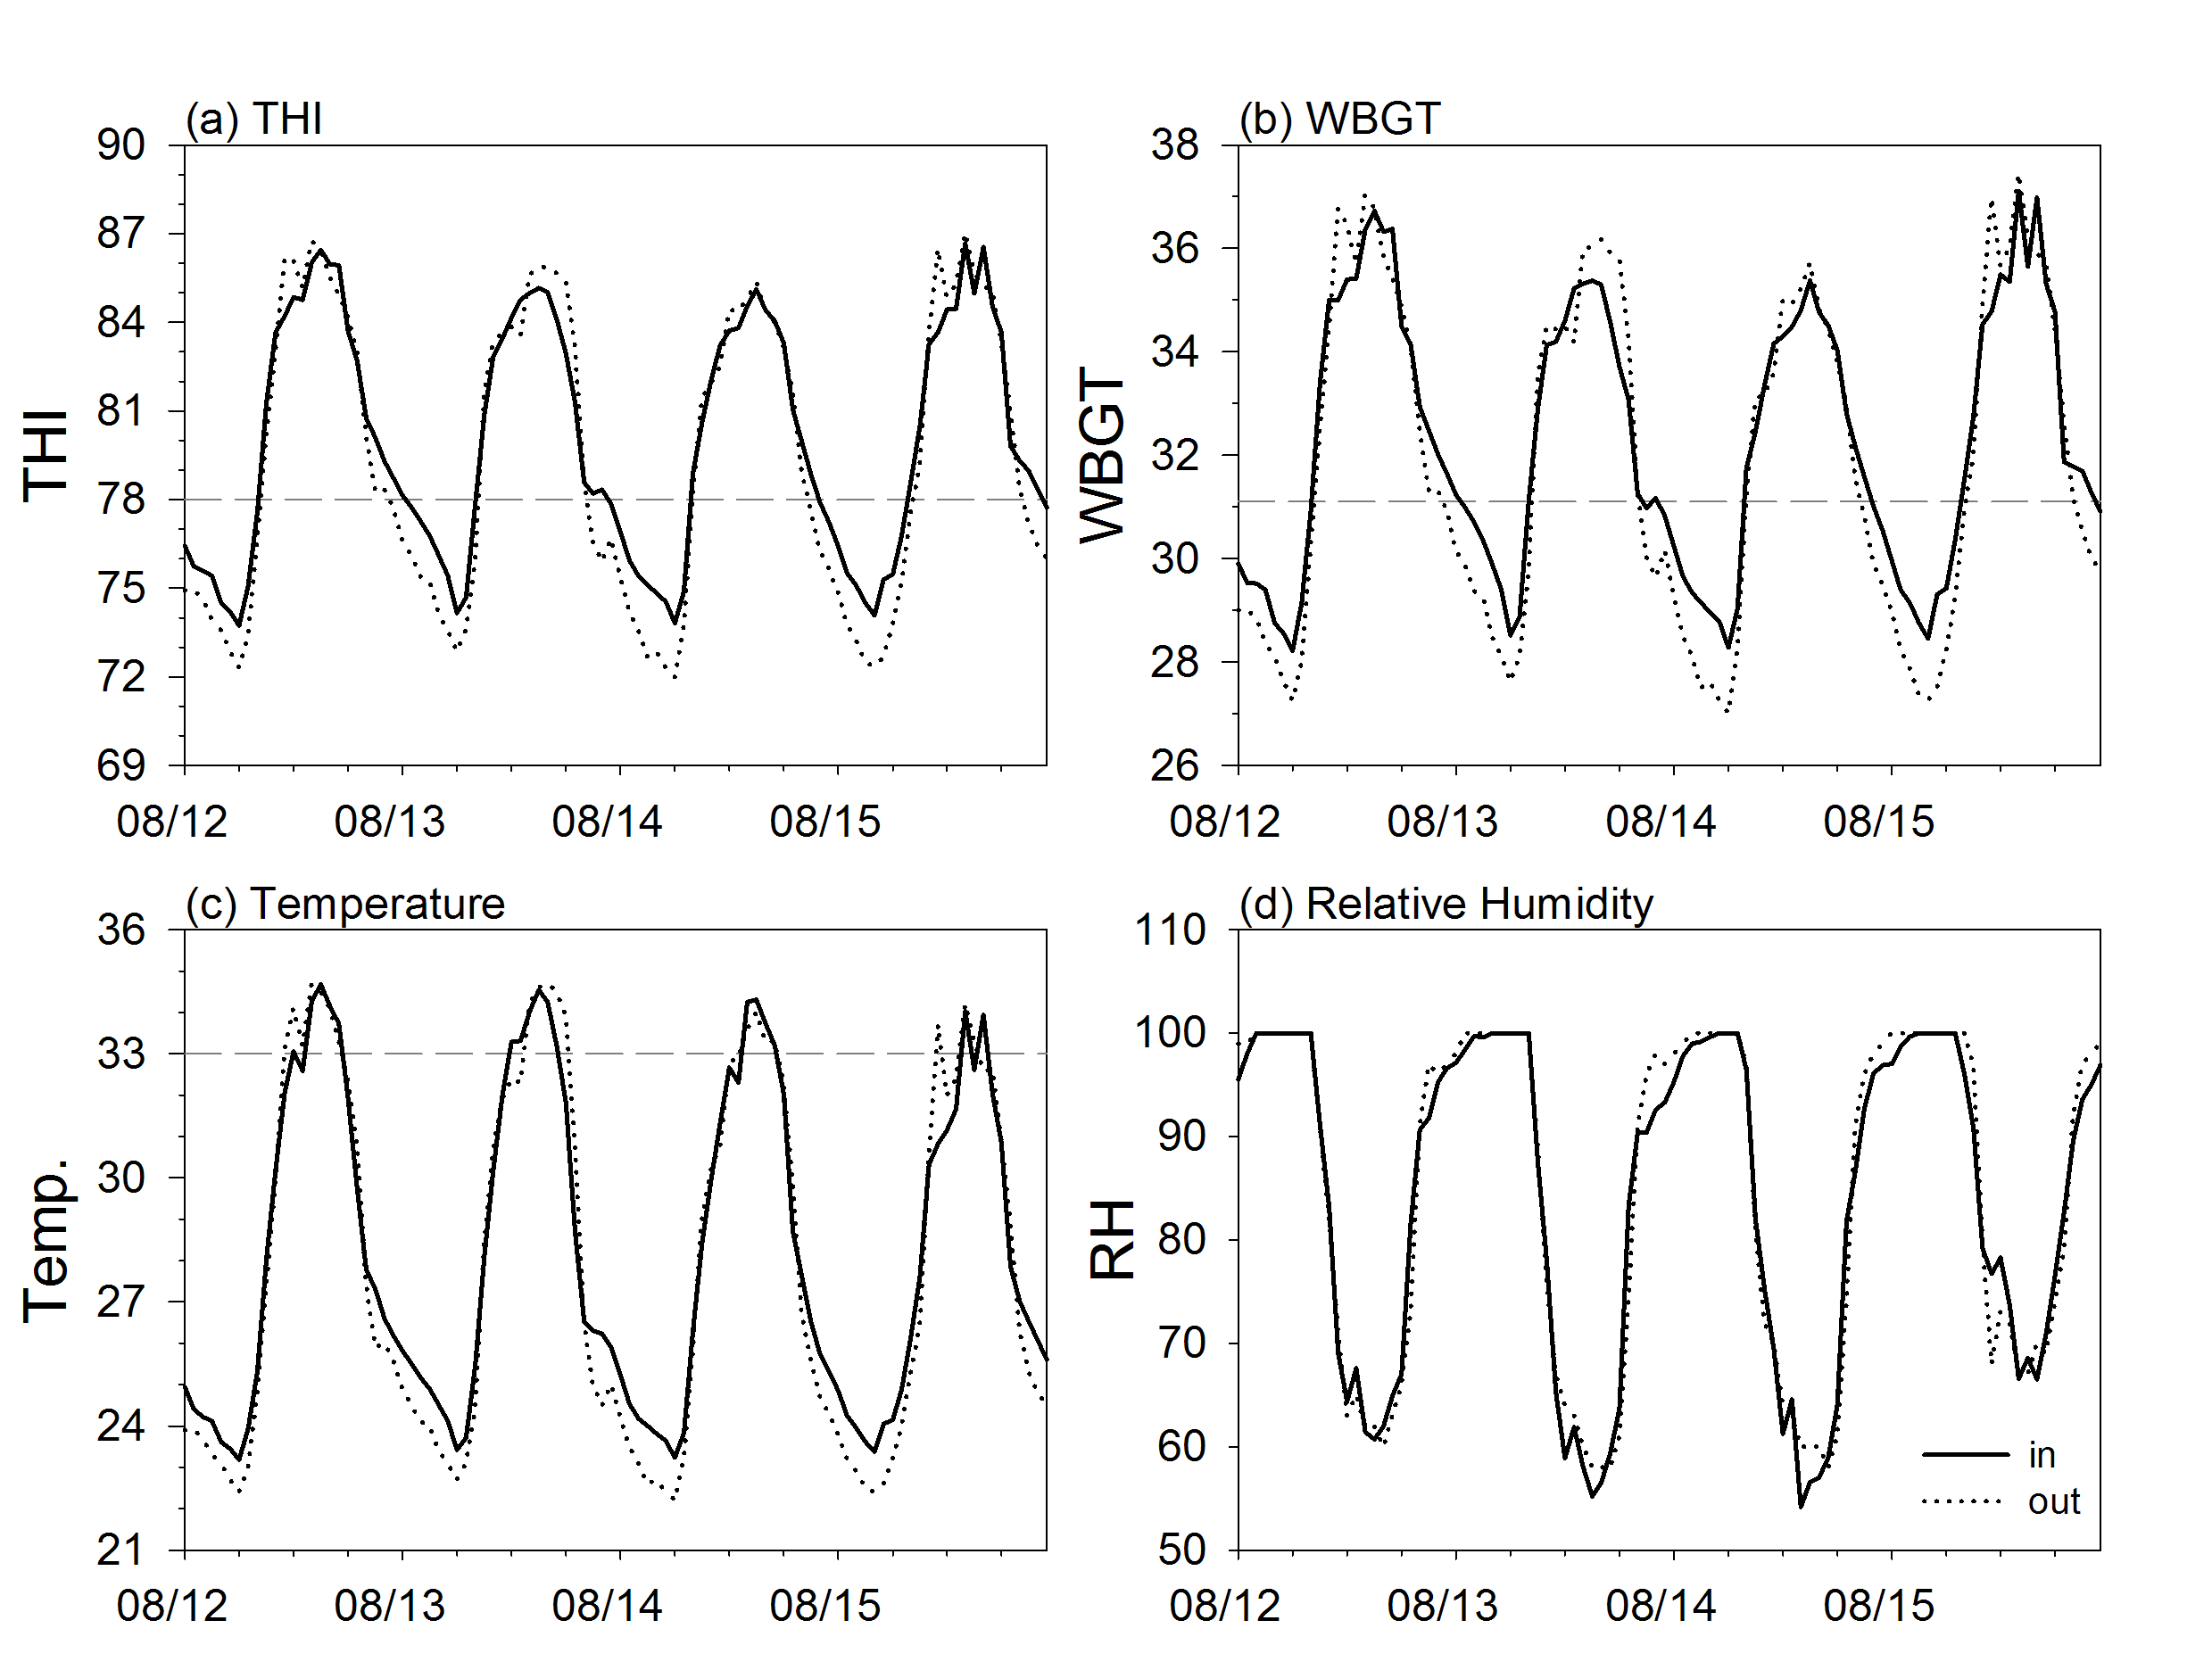 Fig. 3.4.5. Comparison of the internal and external thermal environment for (a) THI, (b) WBGT, (c) temperature, and (d) relative humidity